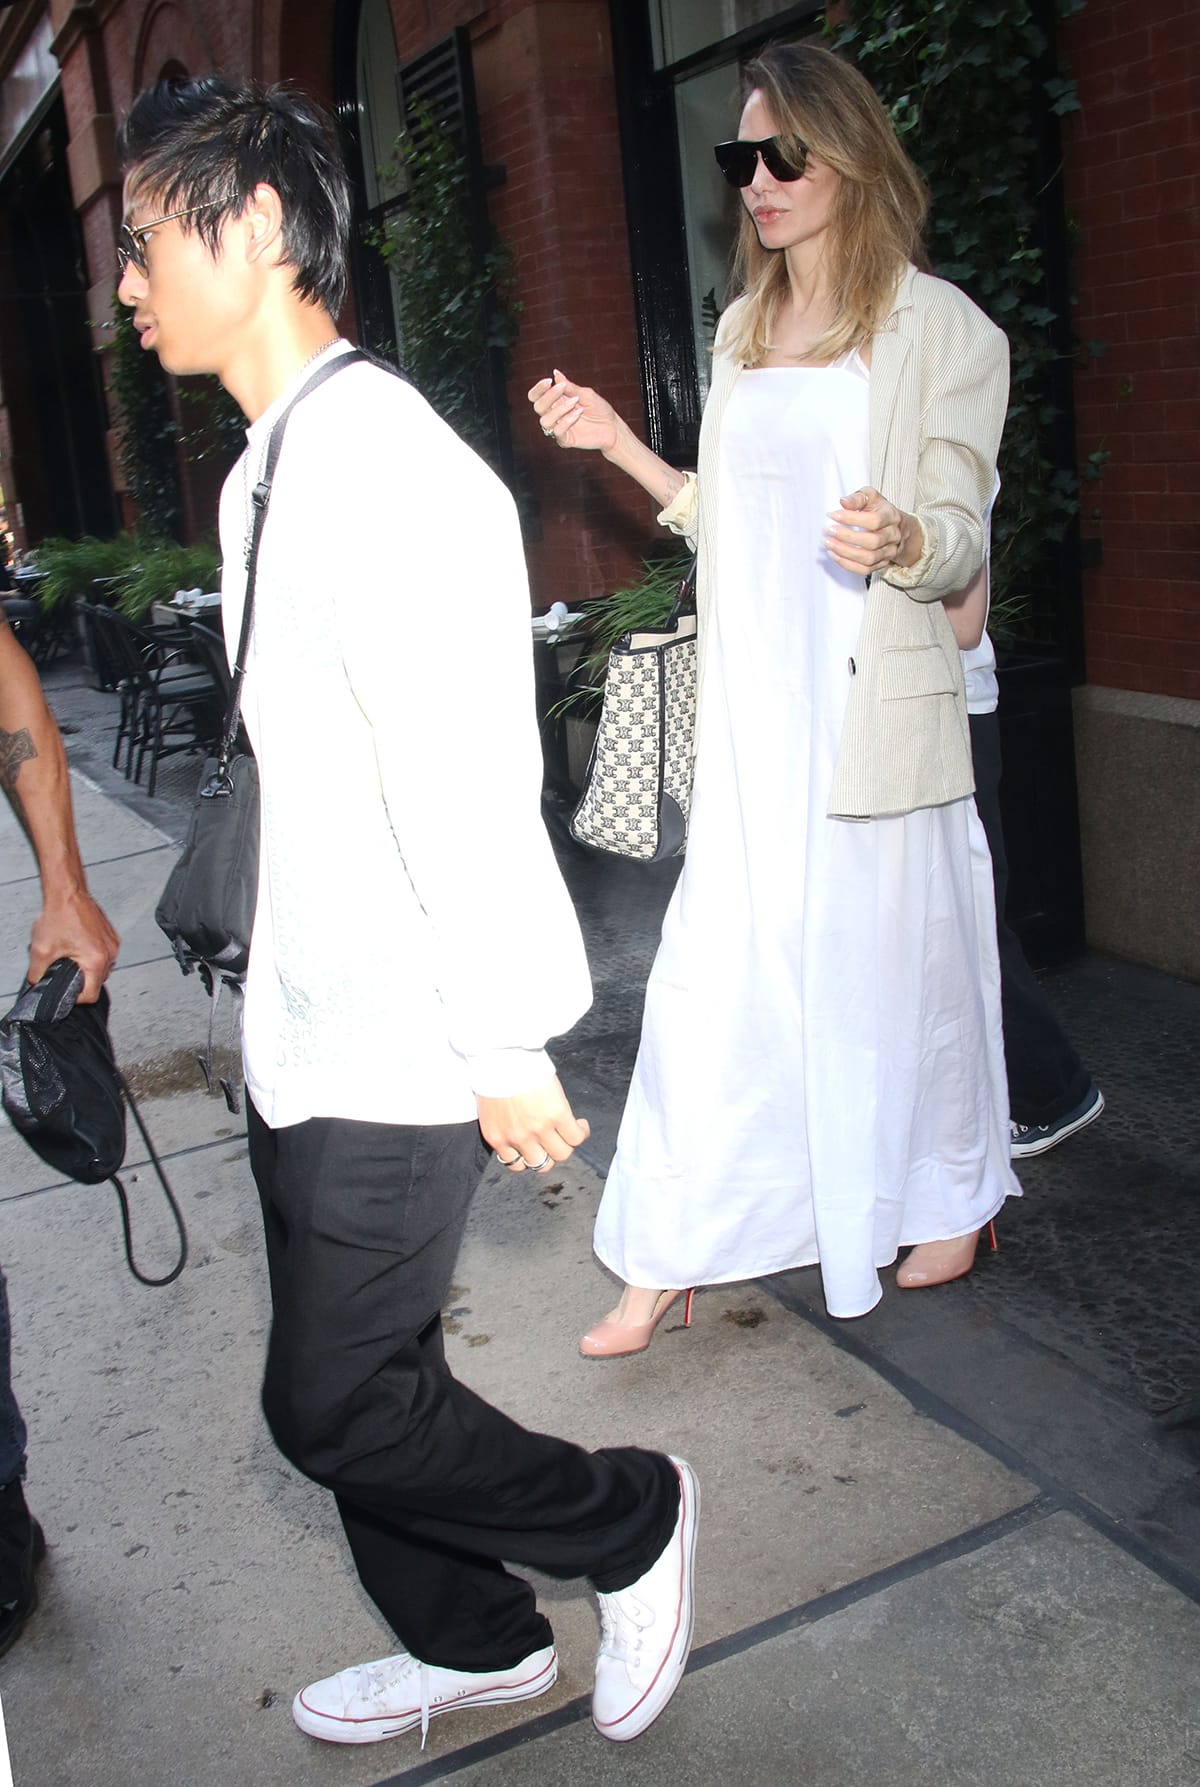 Angelina Jolie serves major summer vibes in a white maxi dress while out with kids, Pax and Vivienne, in New York City on August 18, 2023